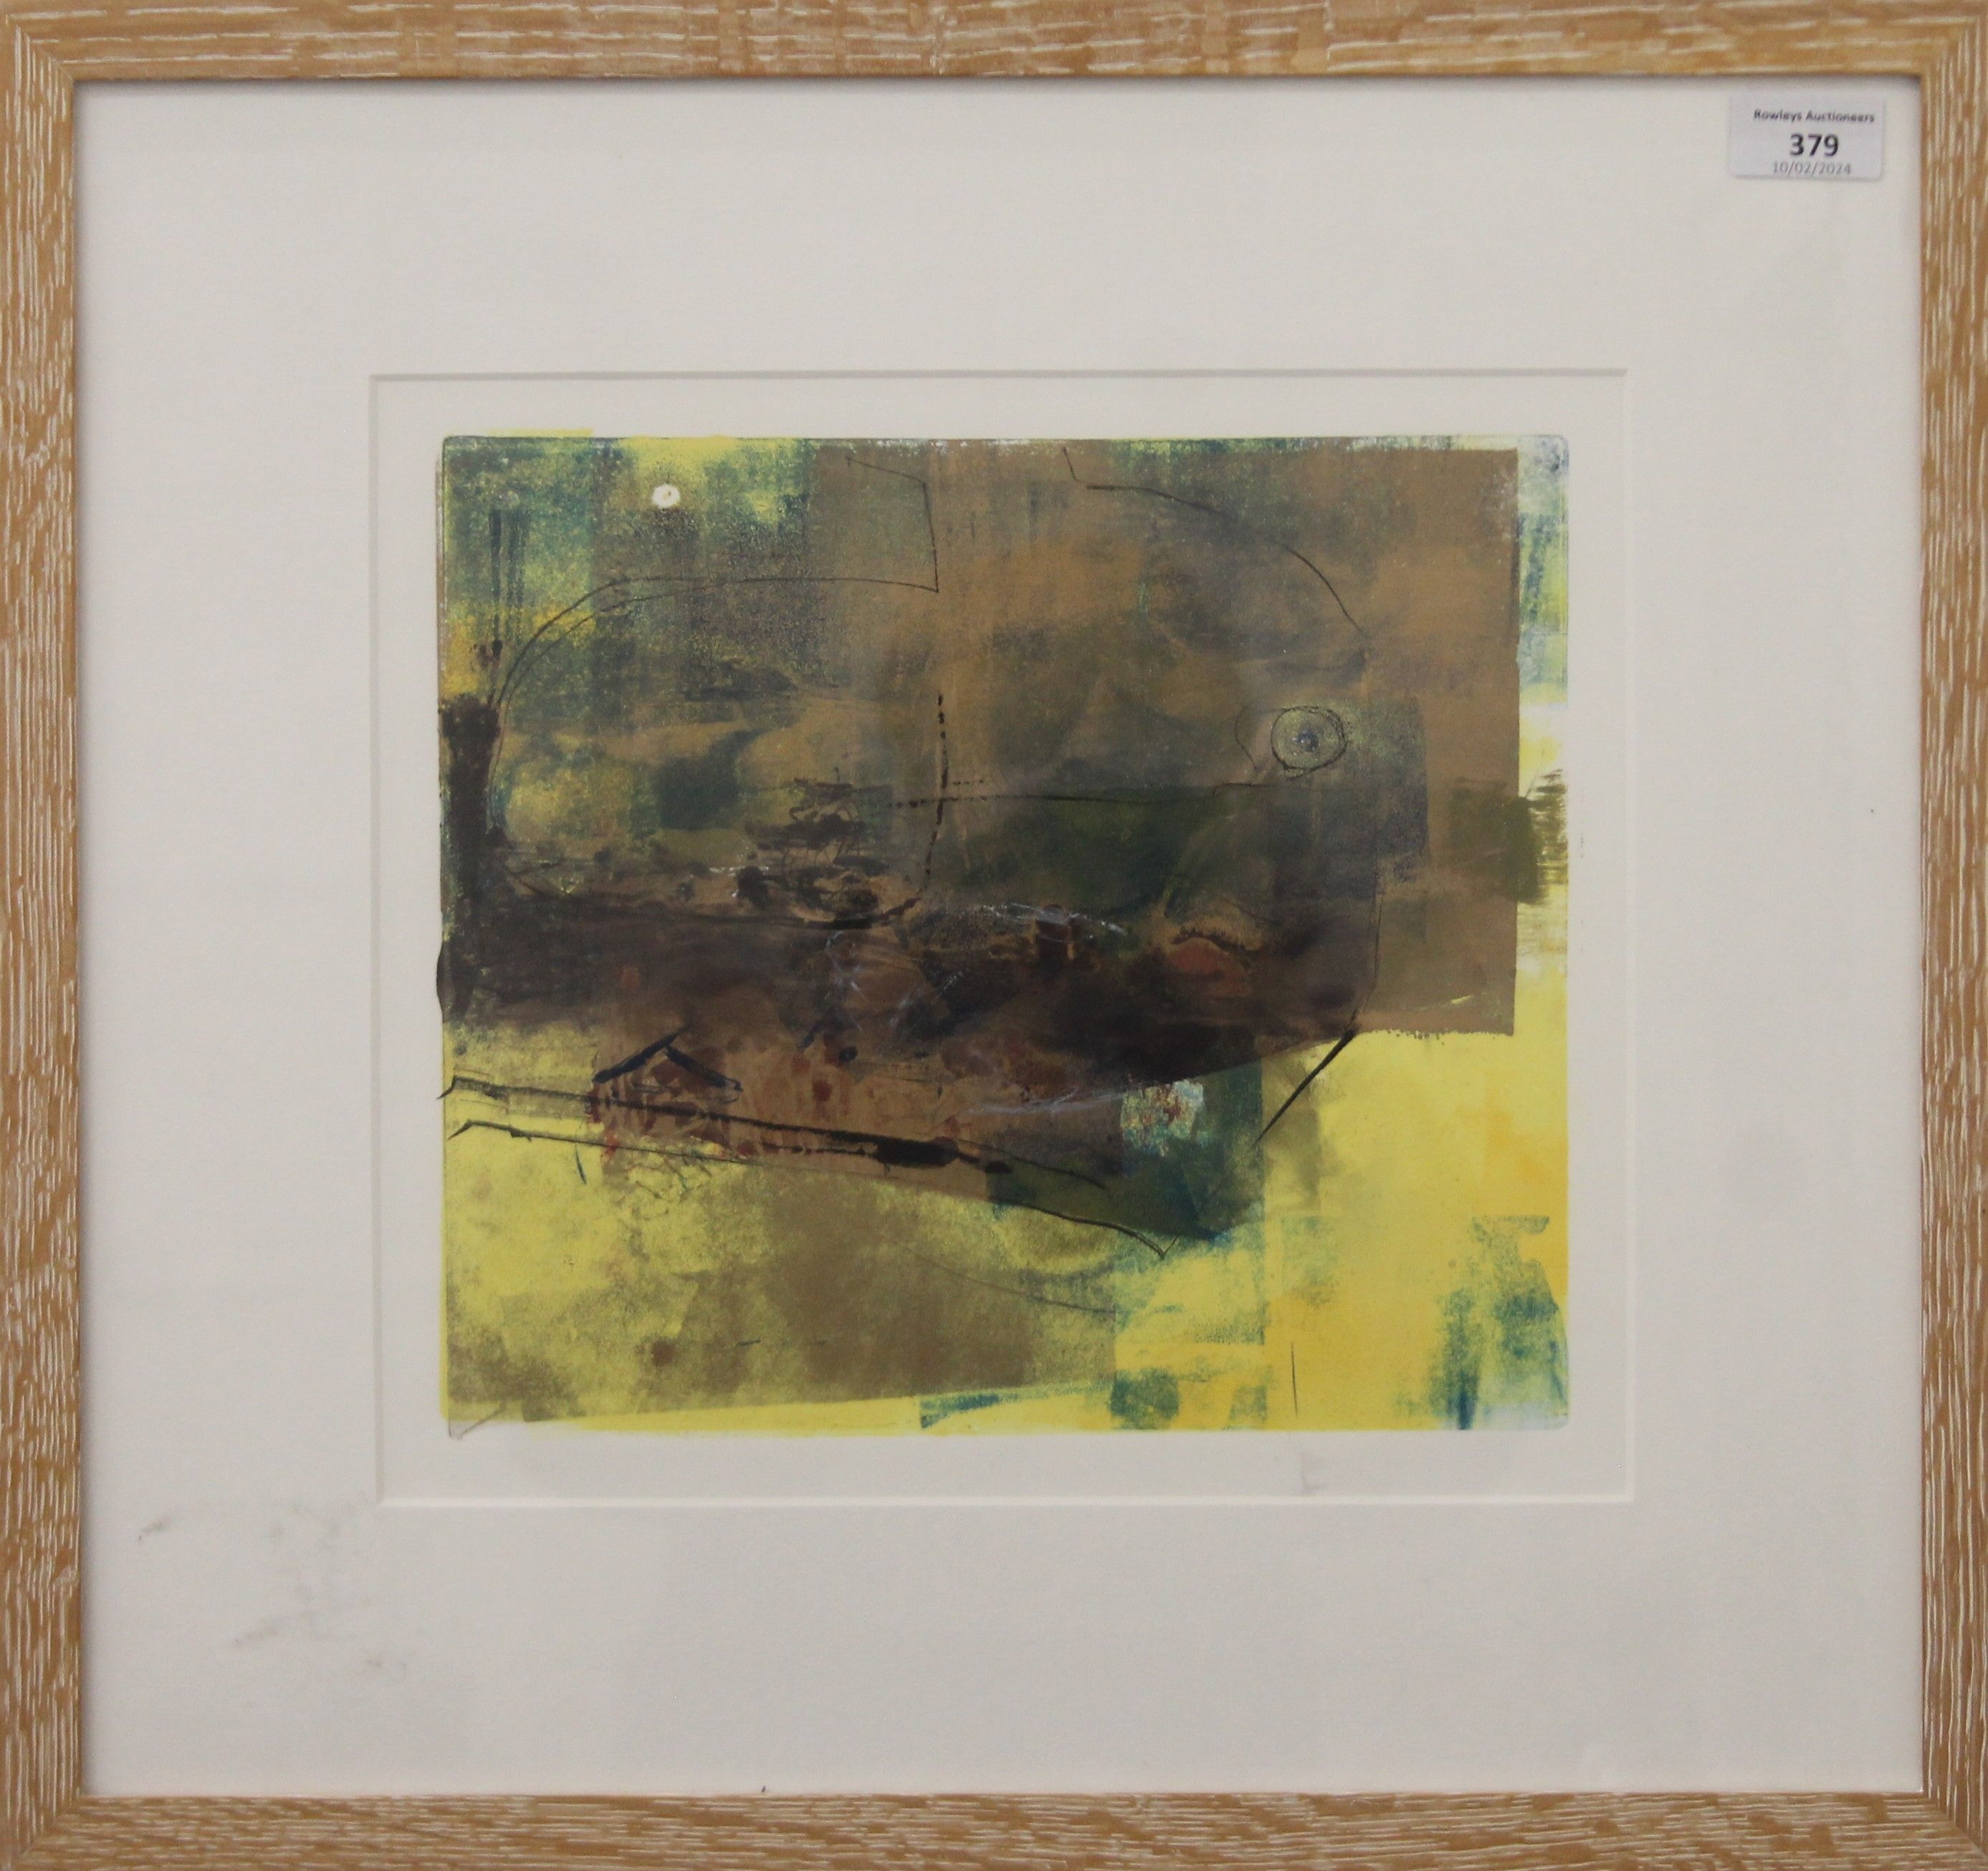 SUSAN WHIMSTER, Abstract, monoprint, framed and glazed. 31.05 x 28.5 cm. - Image 2 of 2